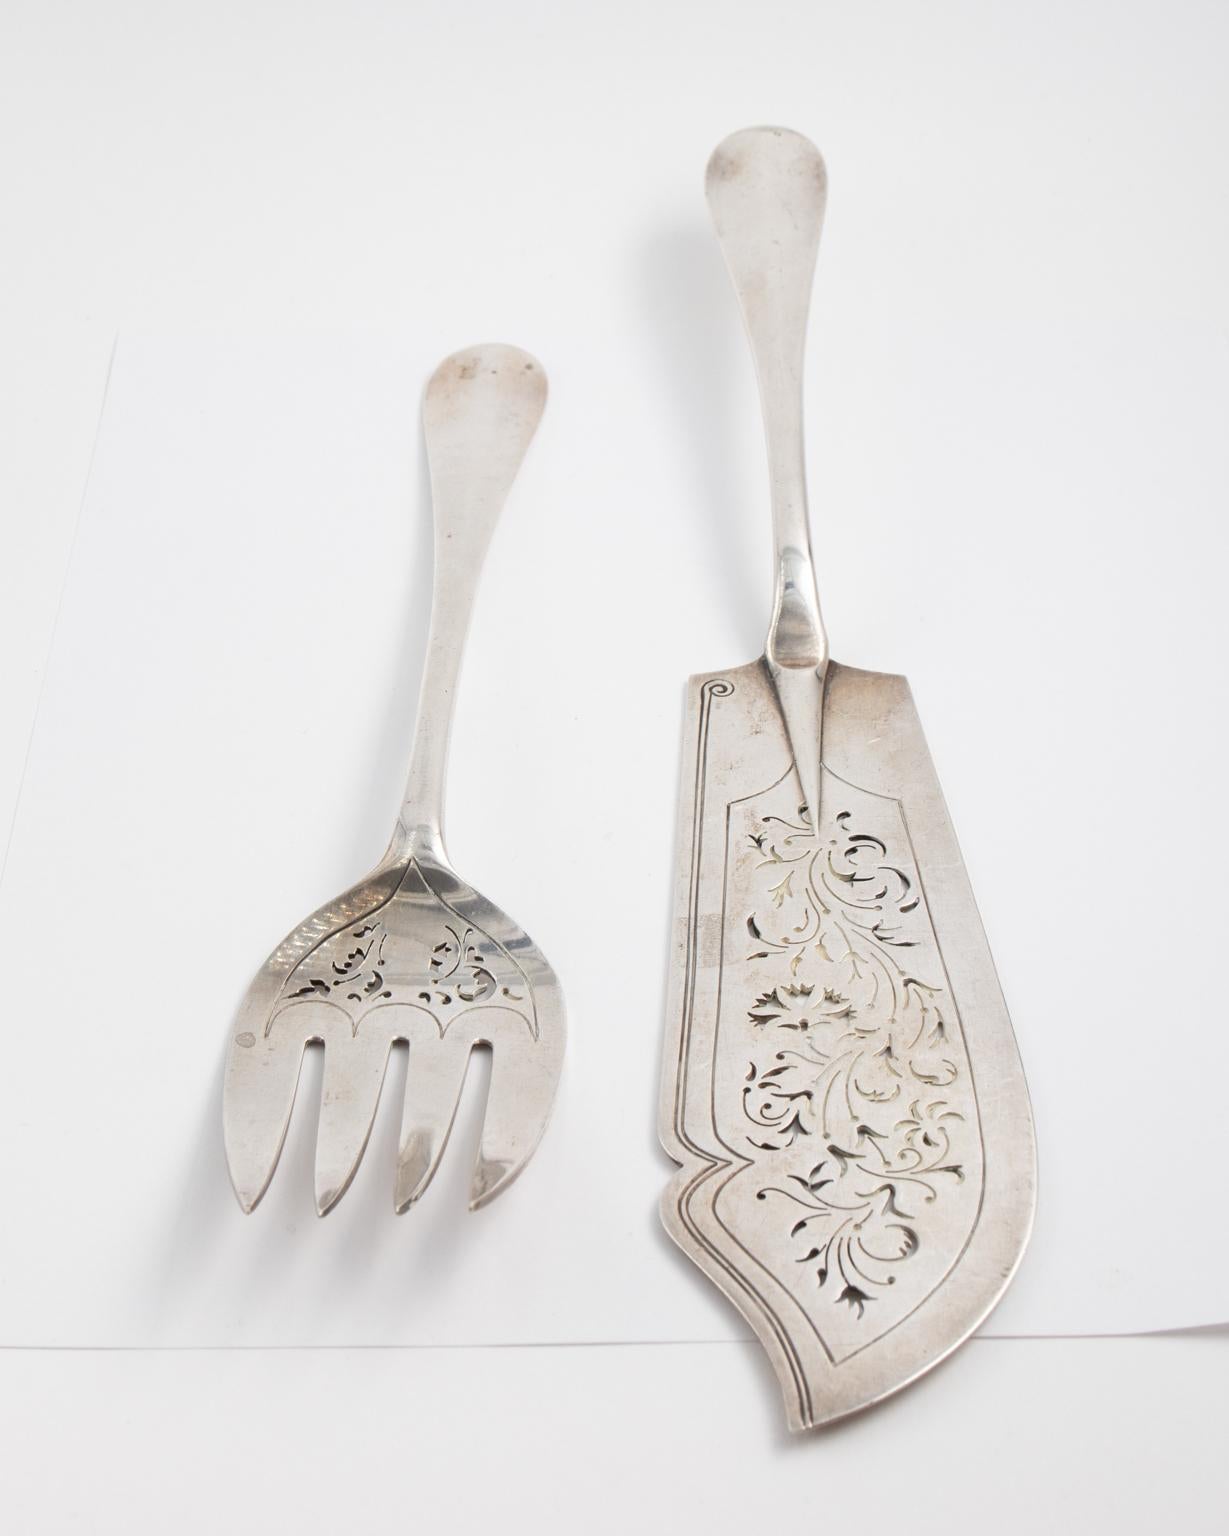 Etched Sterling Silver Fork and Knife Set, circa 1896